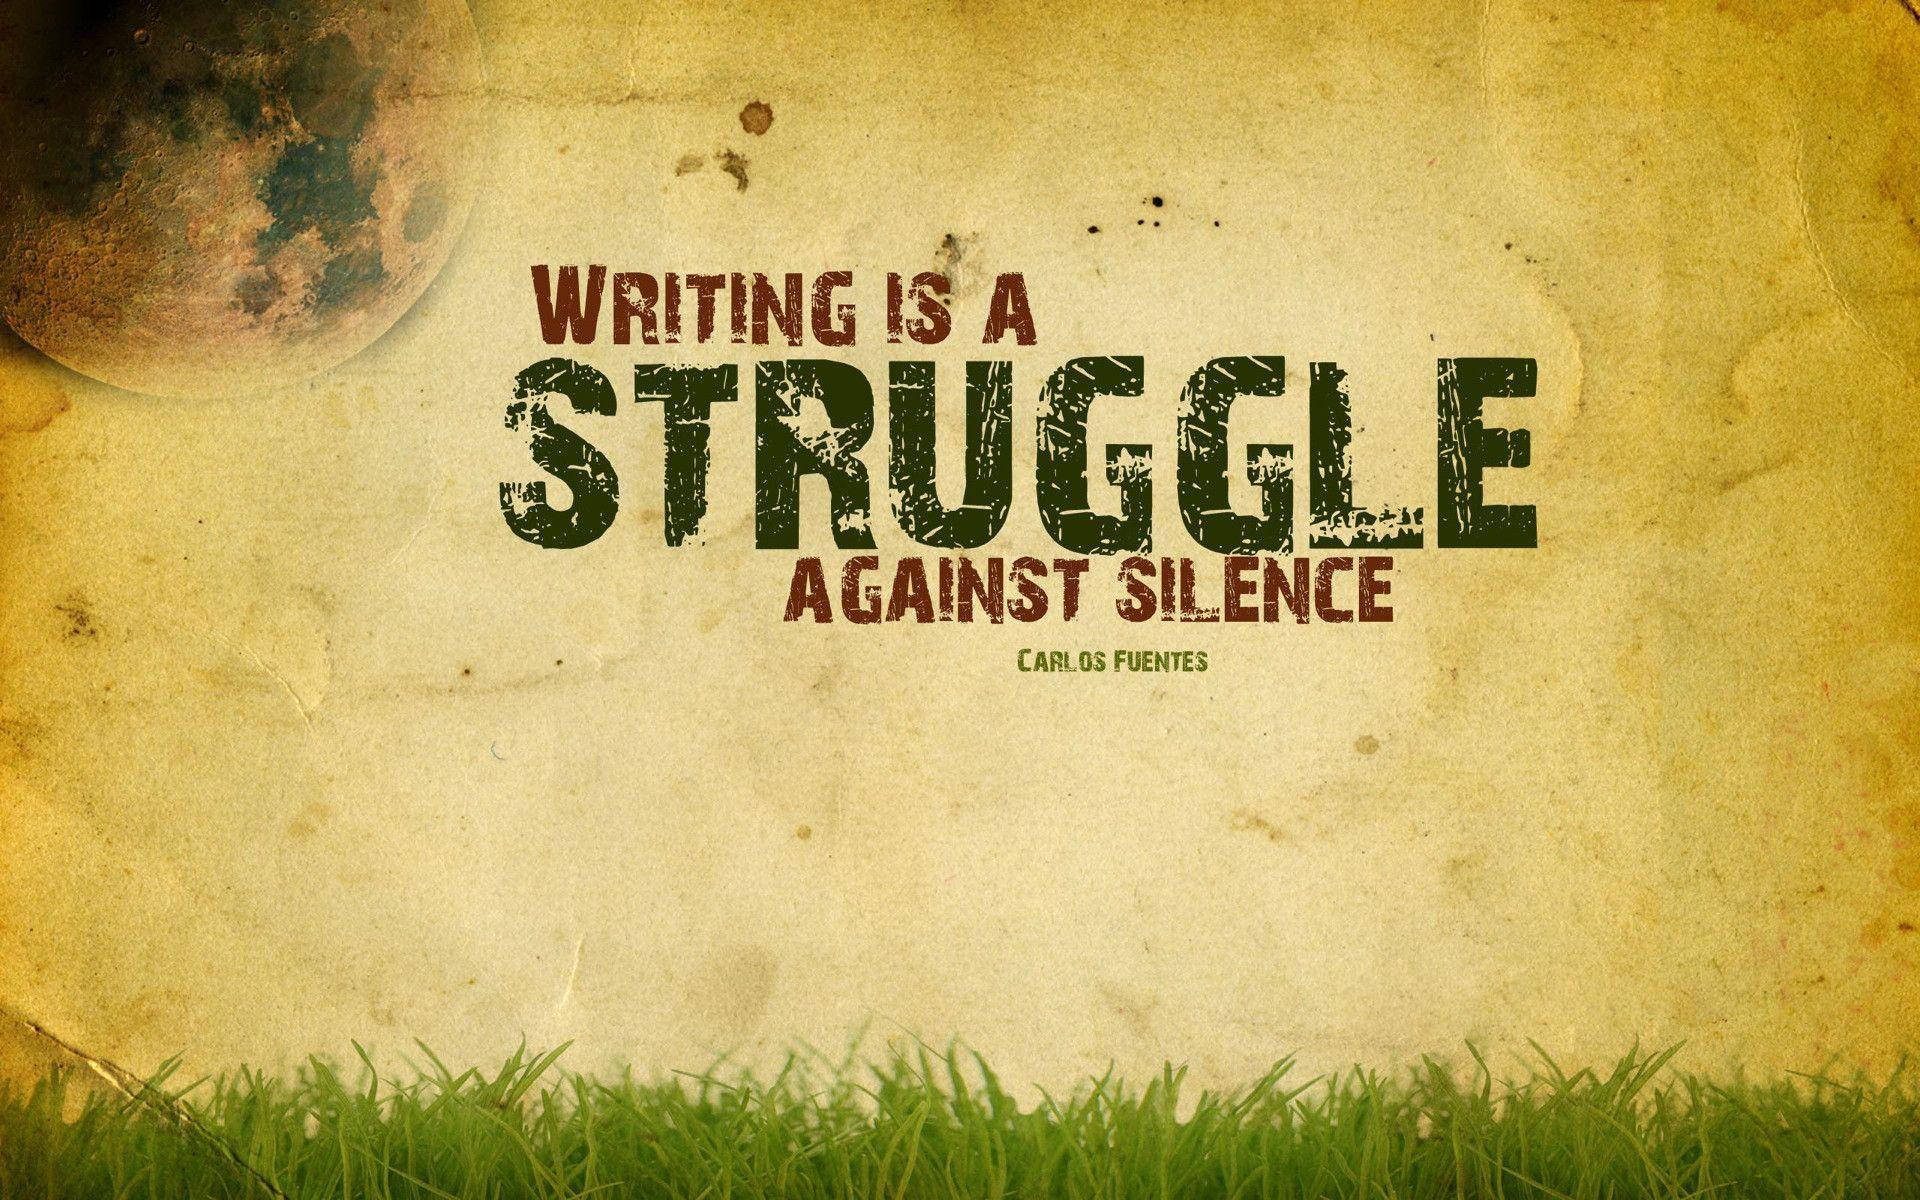 Inspirational Quotes About Writing